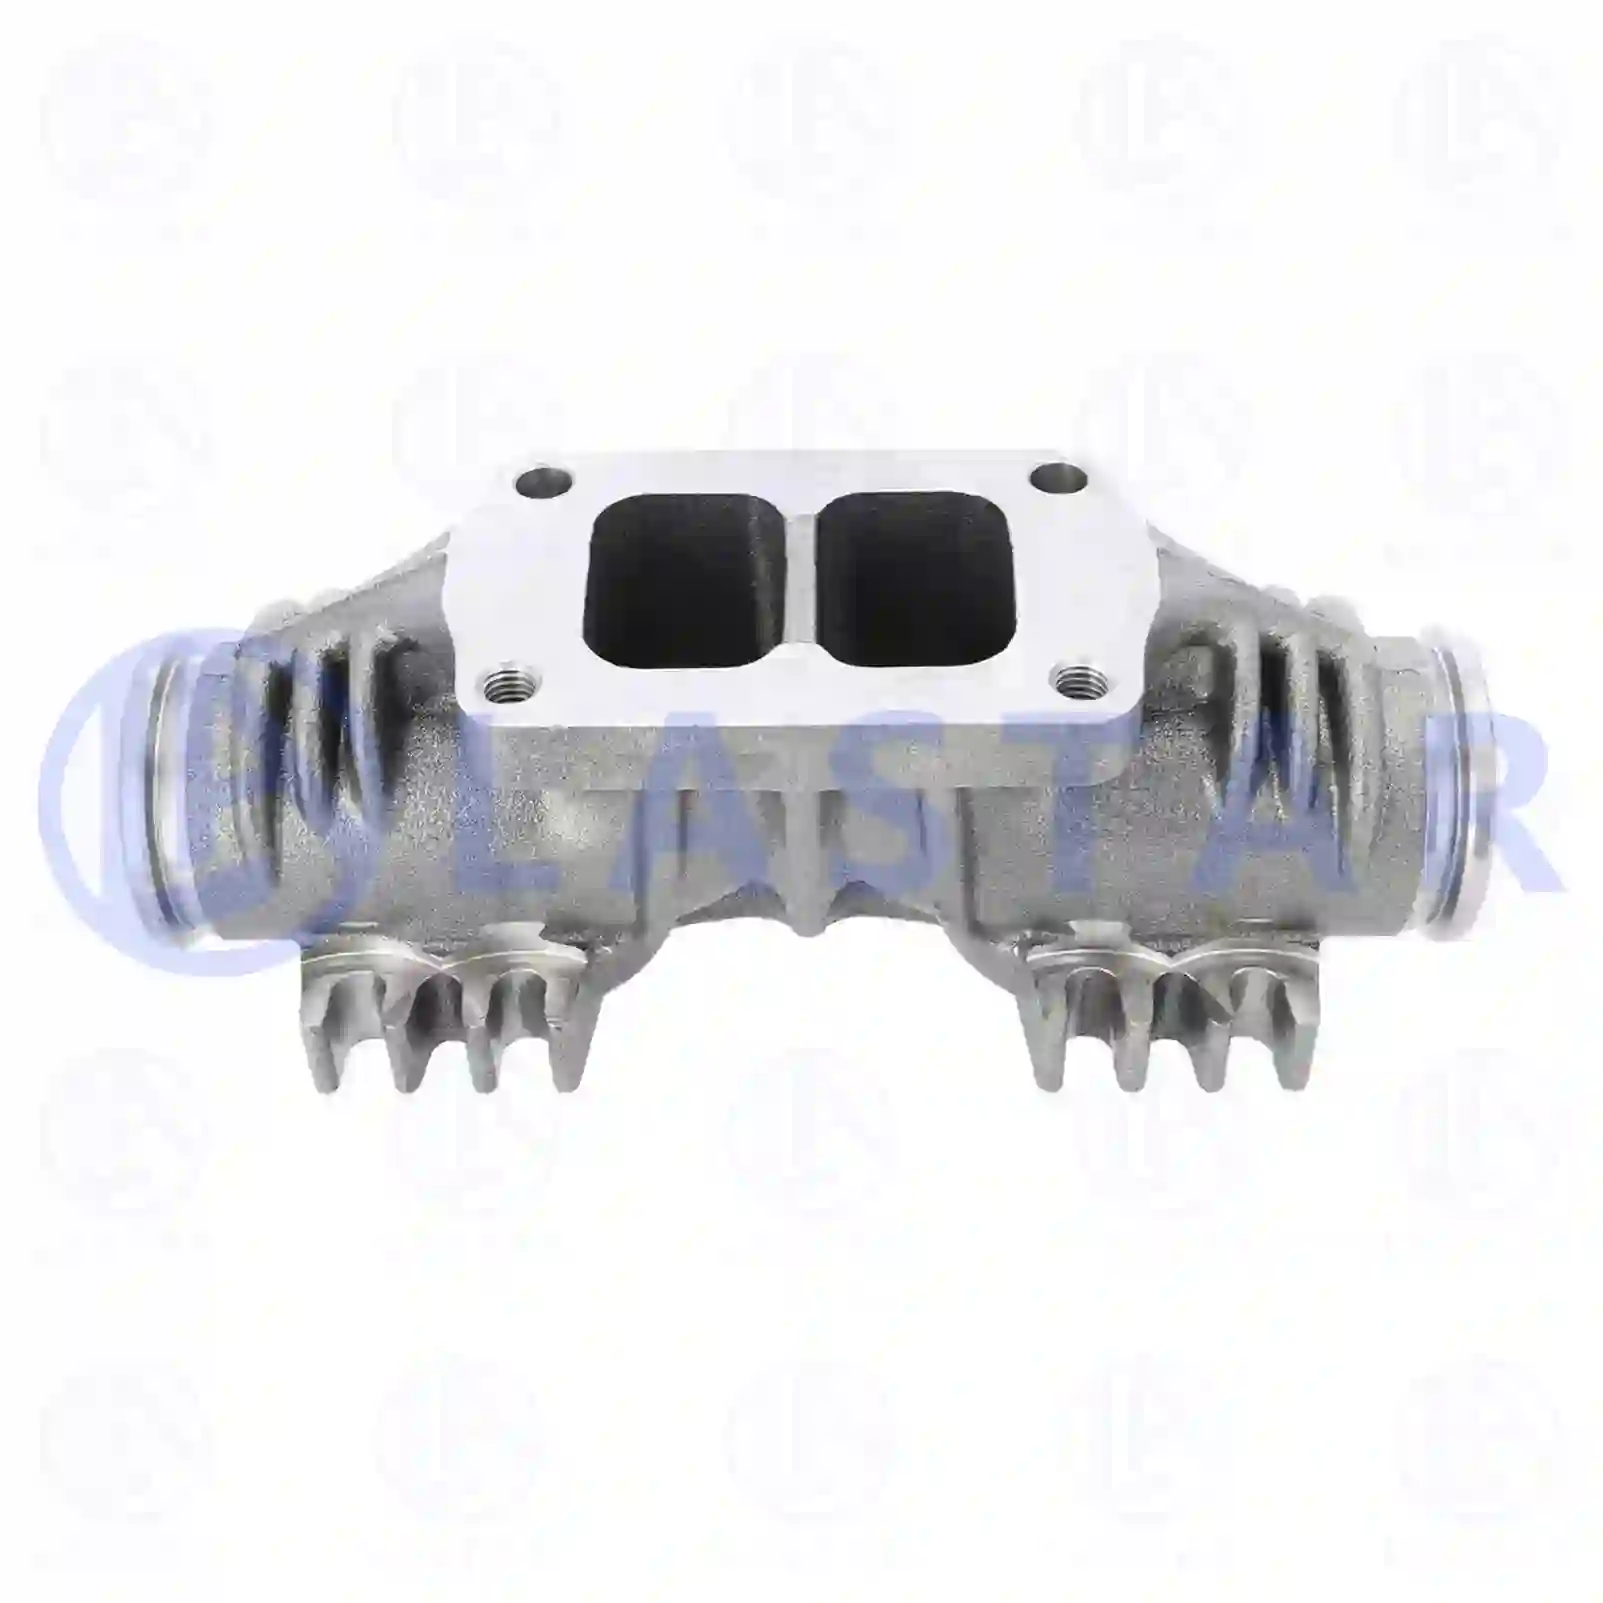 Exhaust manifold, 77703850, 5801627328 ||  77703850 Lastar Spare Part | Truck Spare Parts, Auotomotive Spare Parts Exhaust manifold, 77703850, 5801627328 ||  77703850 Lastar Spare Part | Truck Spare Parts, Auotomotive Spare Parts